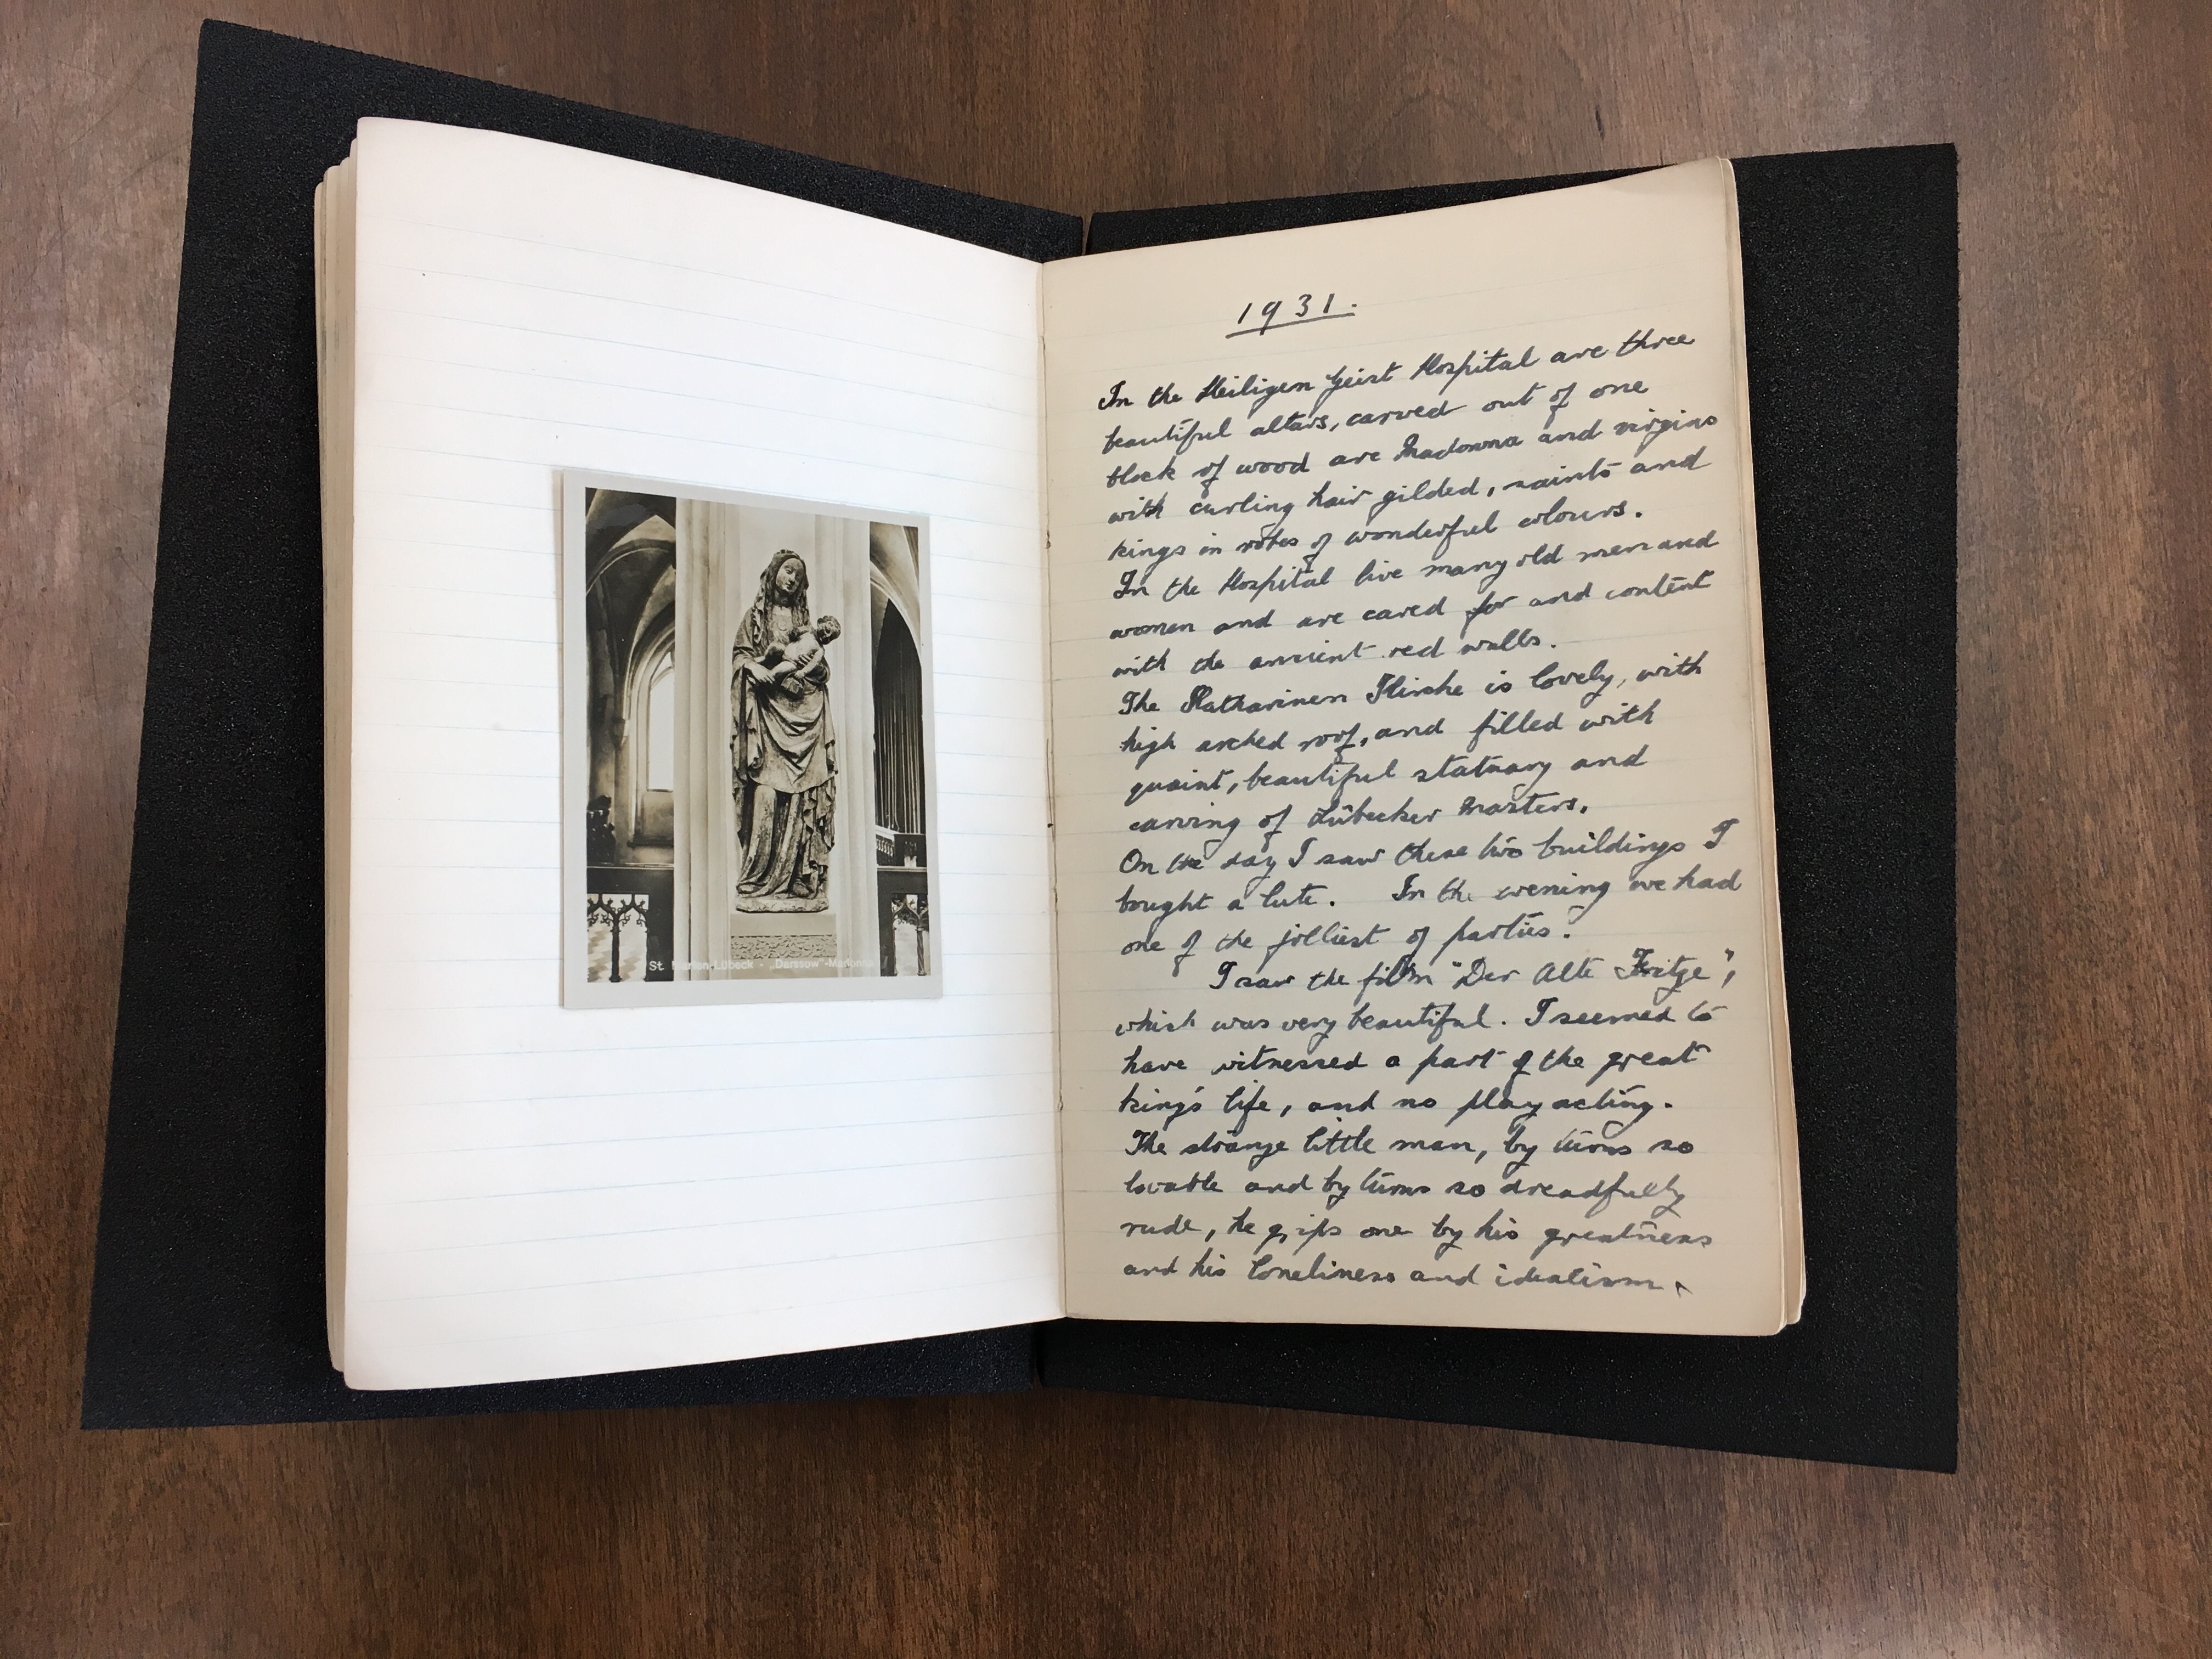 Open diary spread with hand-written entry on the right page and black and white postcard of the Darssow Madonna on the left